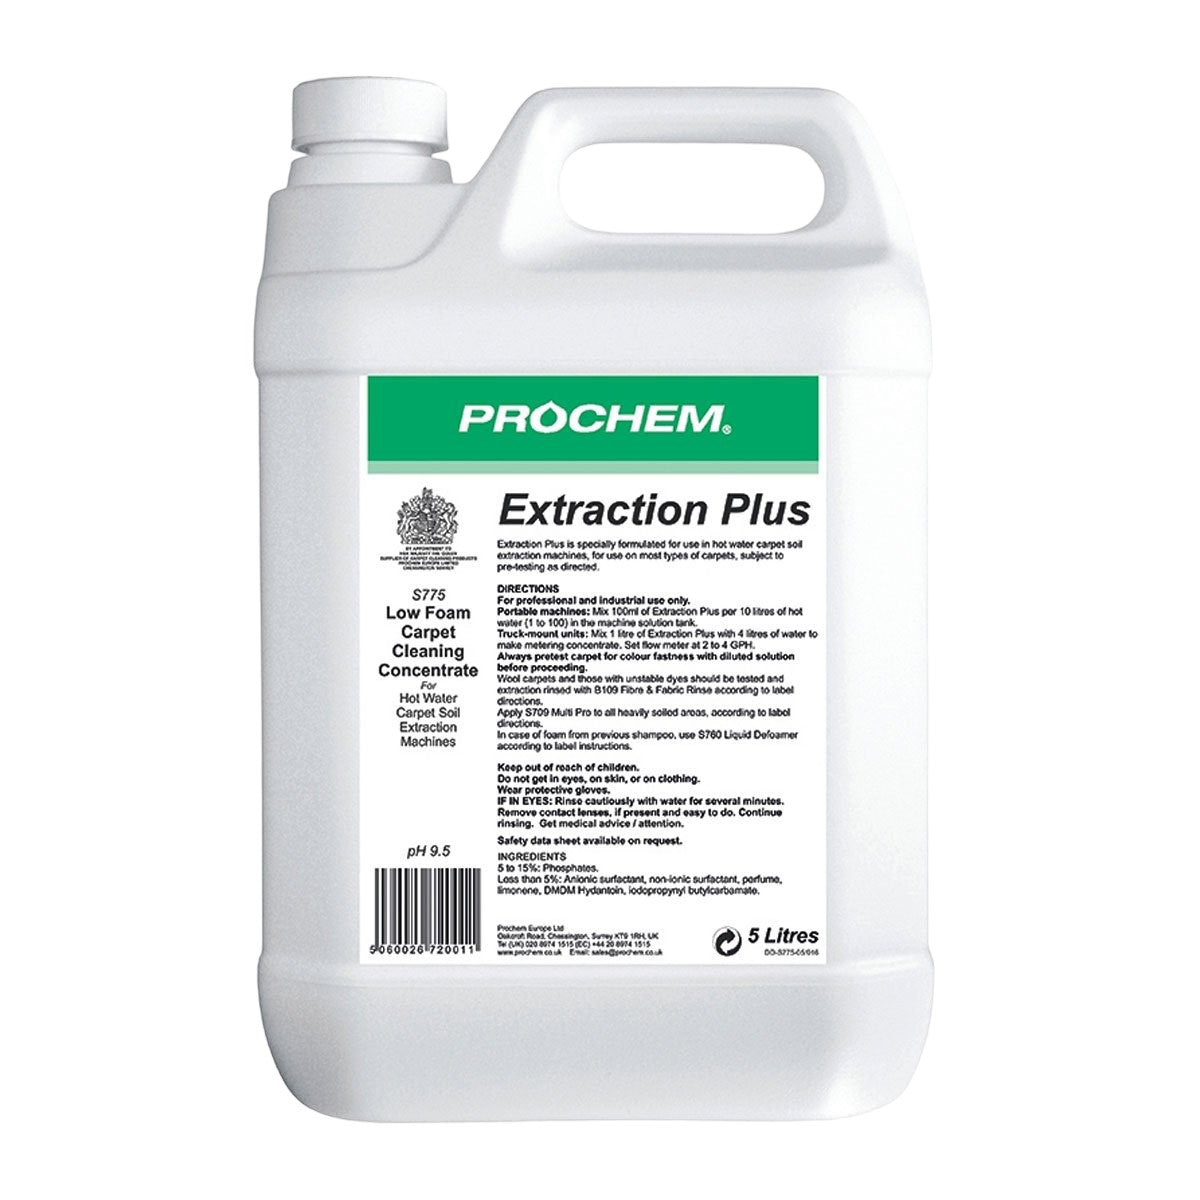 Prochem Extraction Plus Cleaning Concentrate 5 Litre